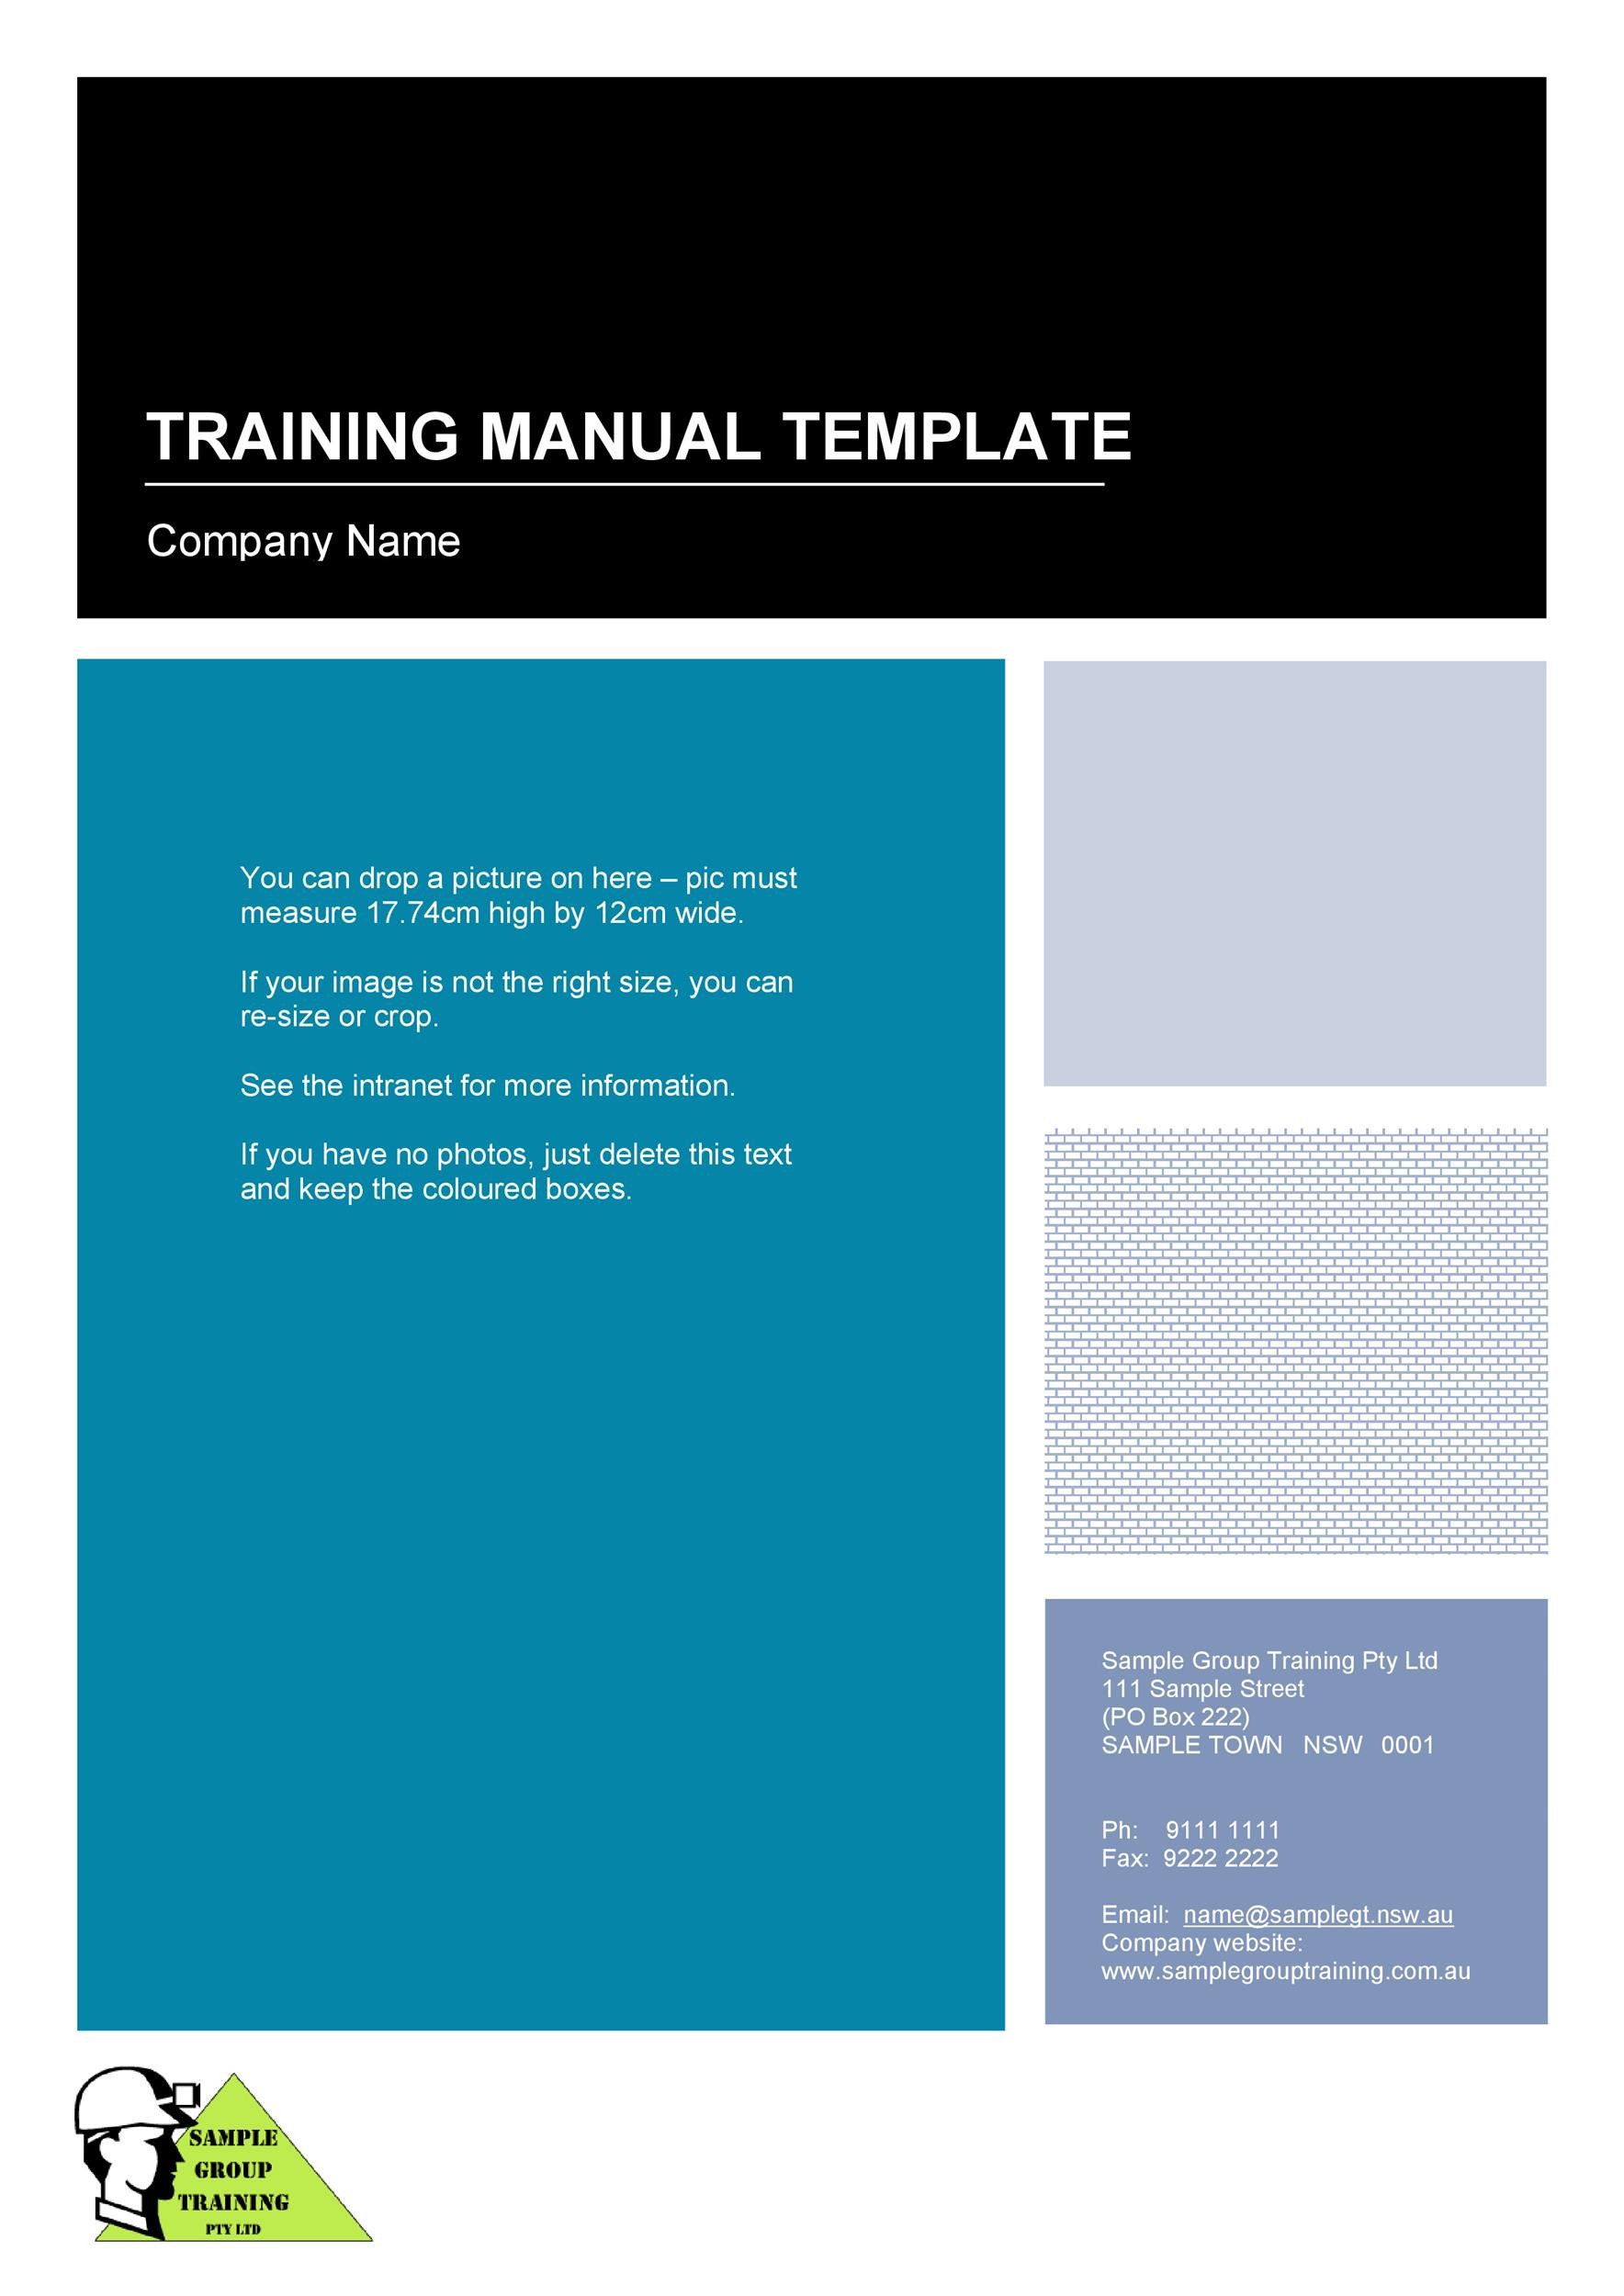 Training Manual - 40+ Free Templates & Examples in MS Word